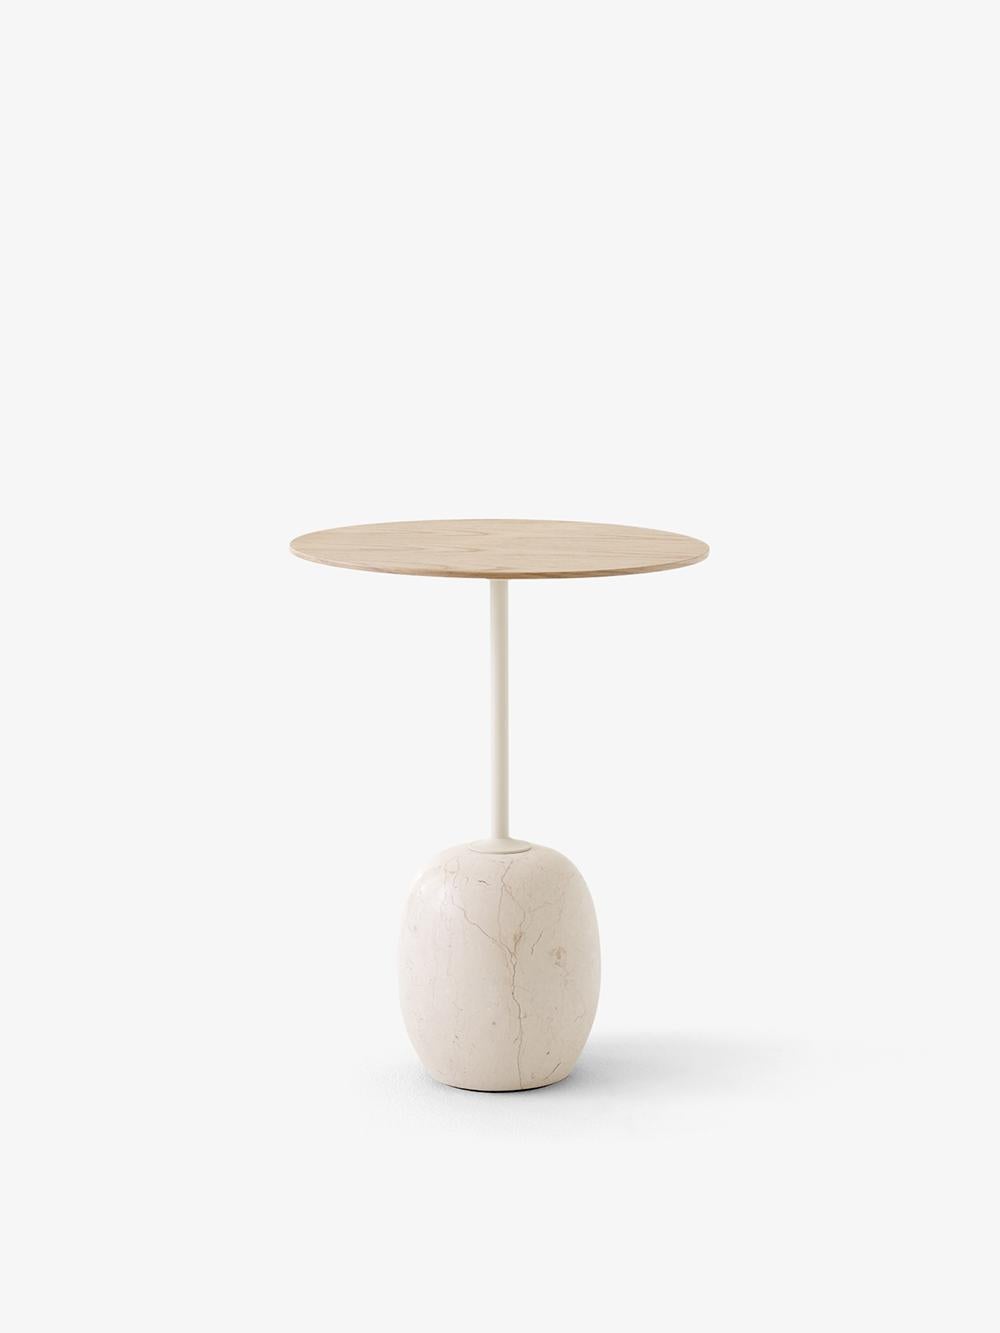 At first glance, Lato resembles a sculpture, with its slim, round table top balanced by an oval-shaped base. 
The marble is turned into shape on a lather and then honed to a semi Matt finish. 
Striking, graphic and poetic, its purity of form is